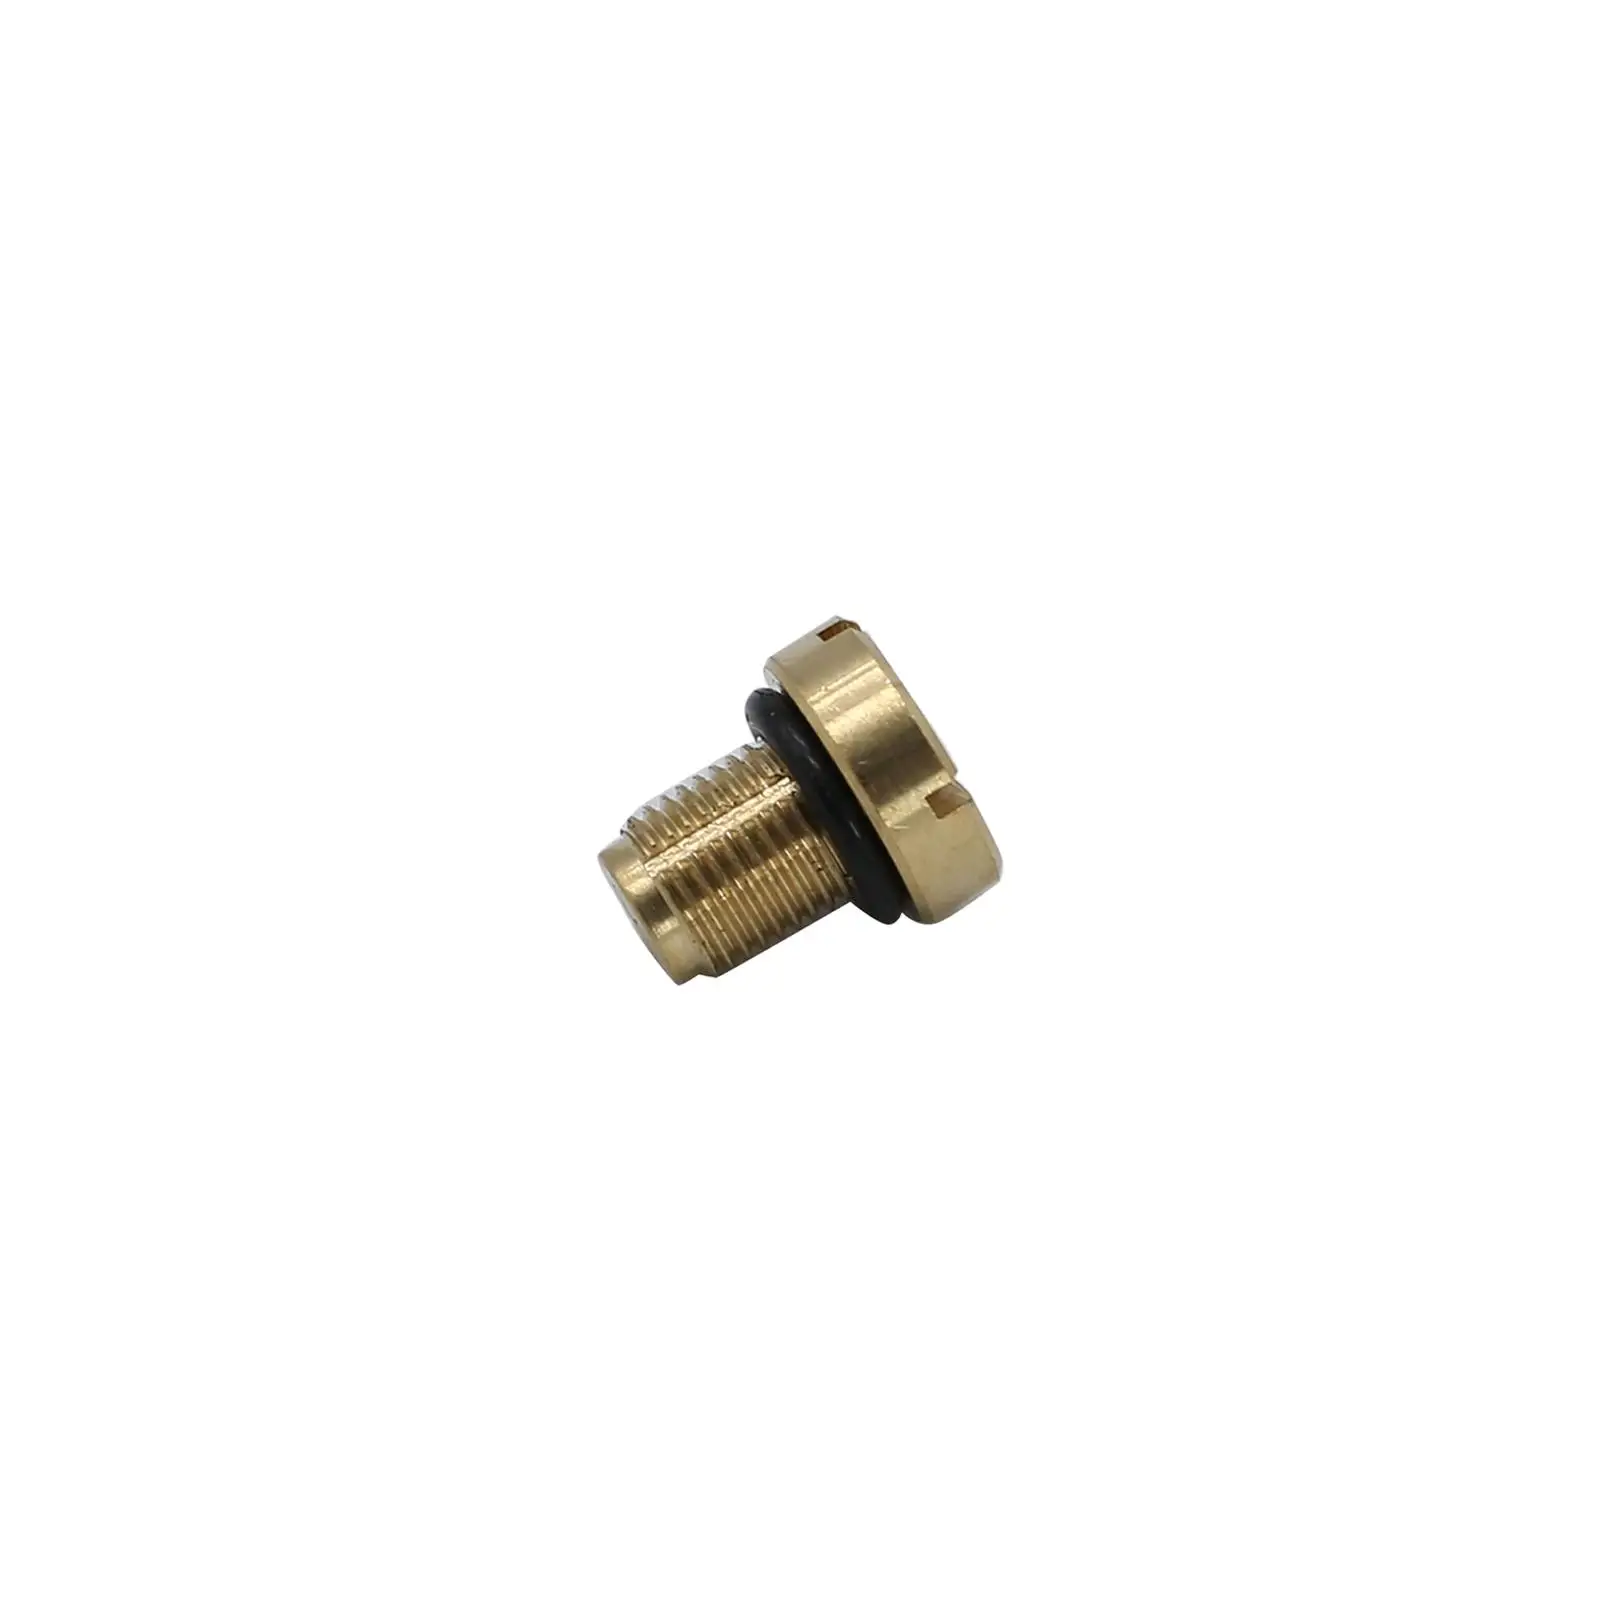 Expansion Tank Bleeder Screw for BMW E36 328IS 1996-1999 Replaces